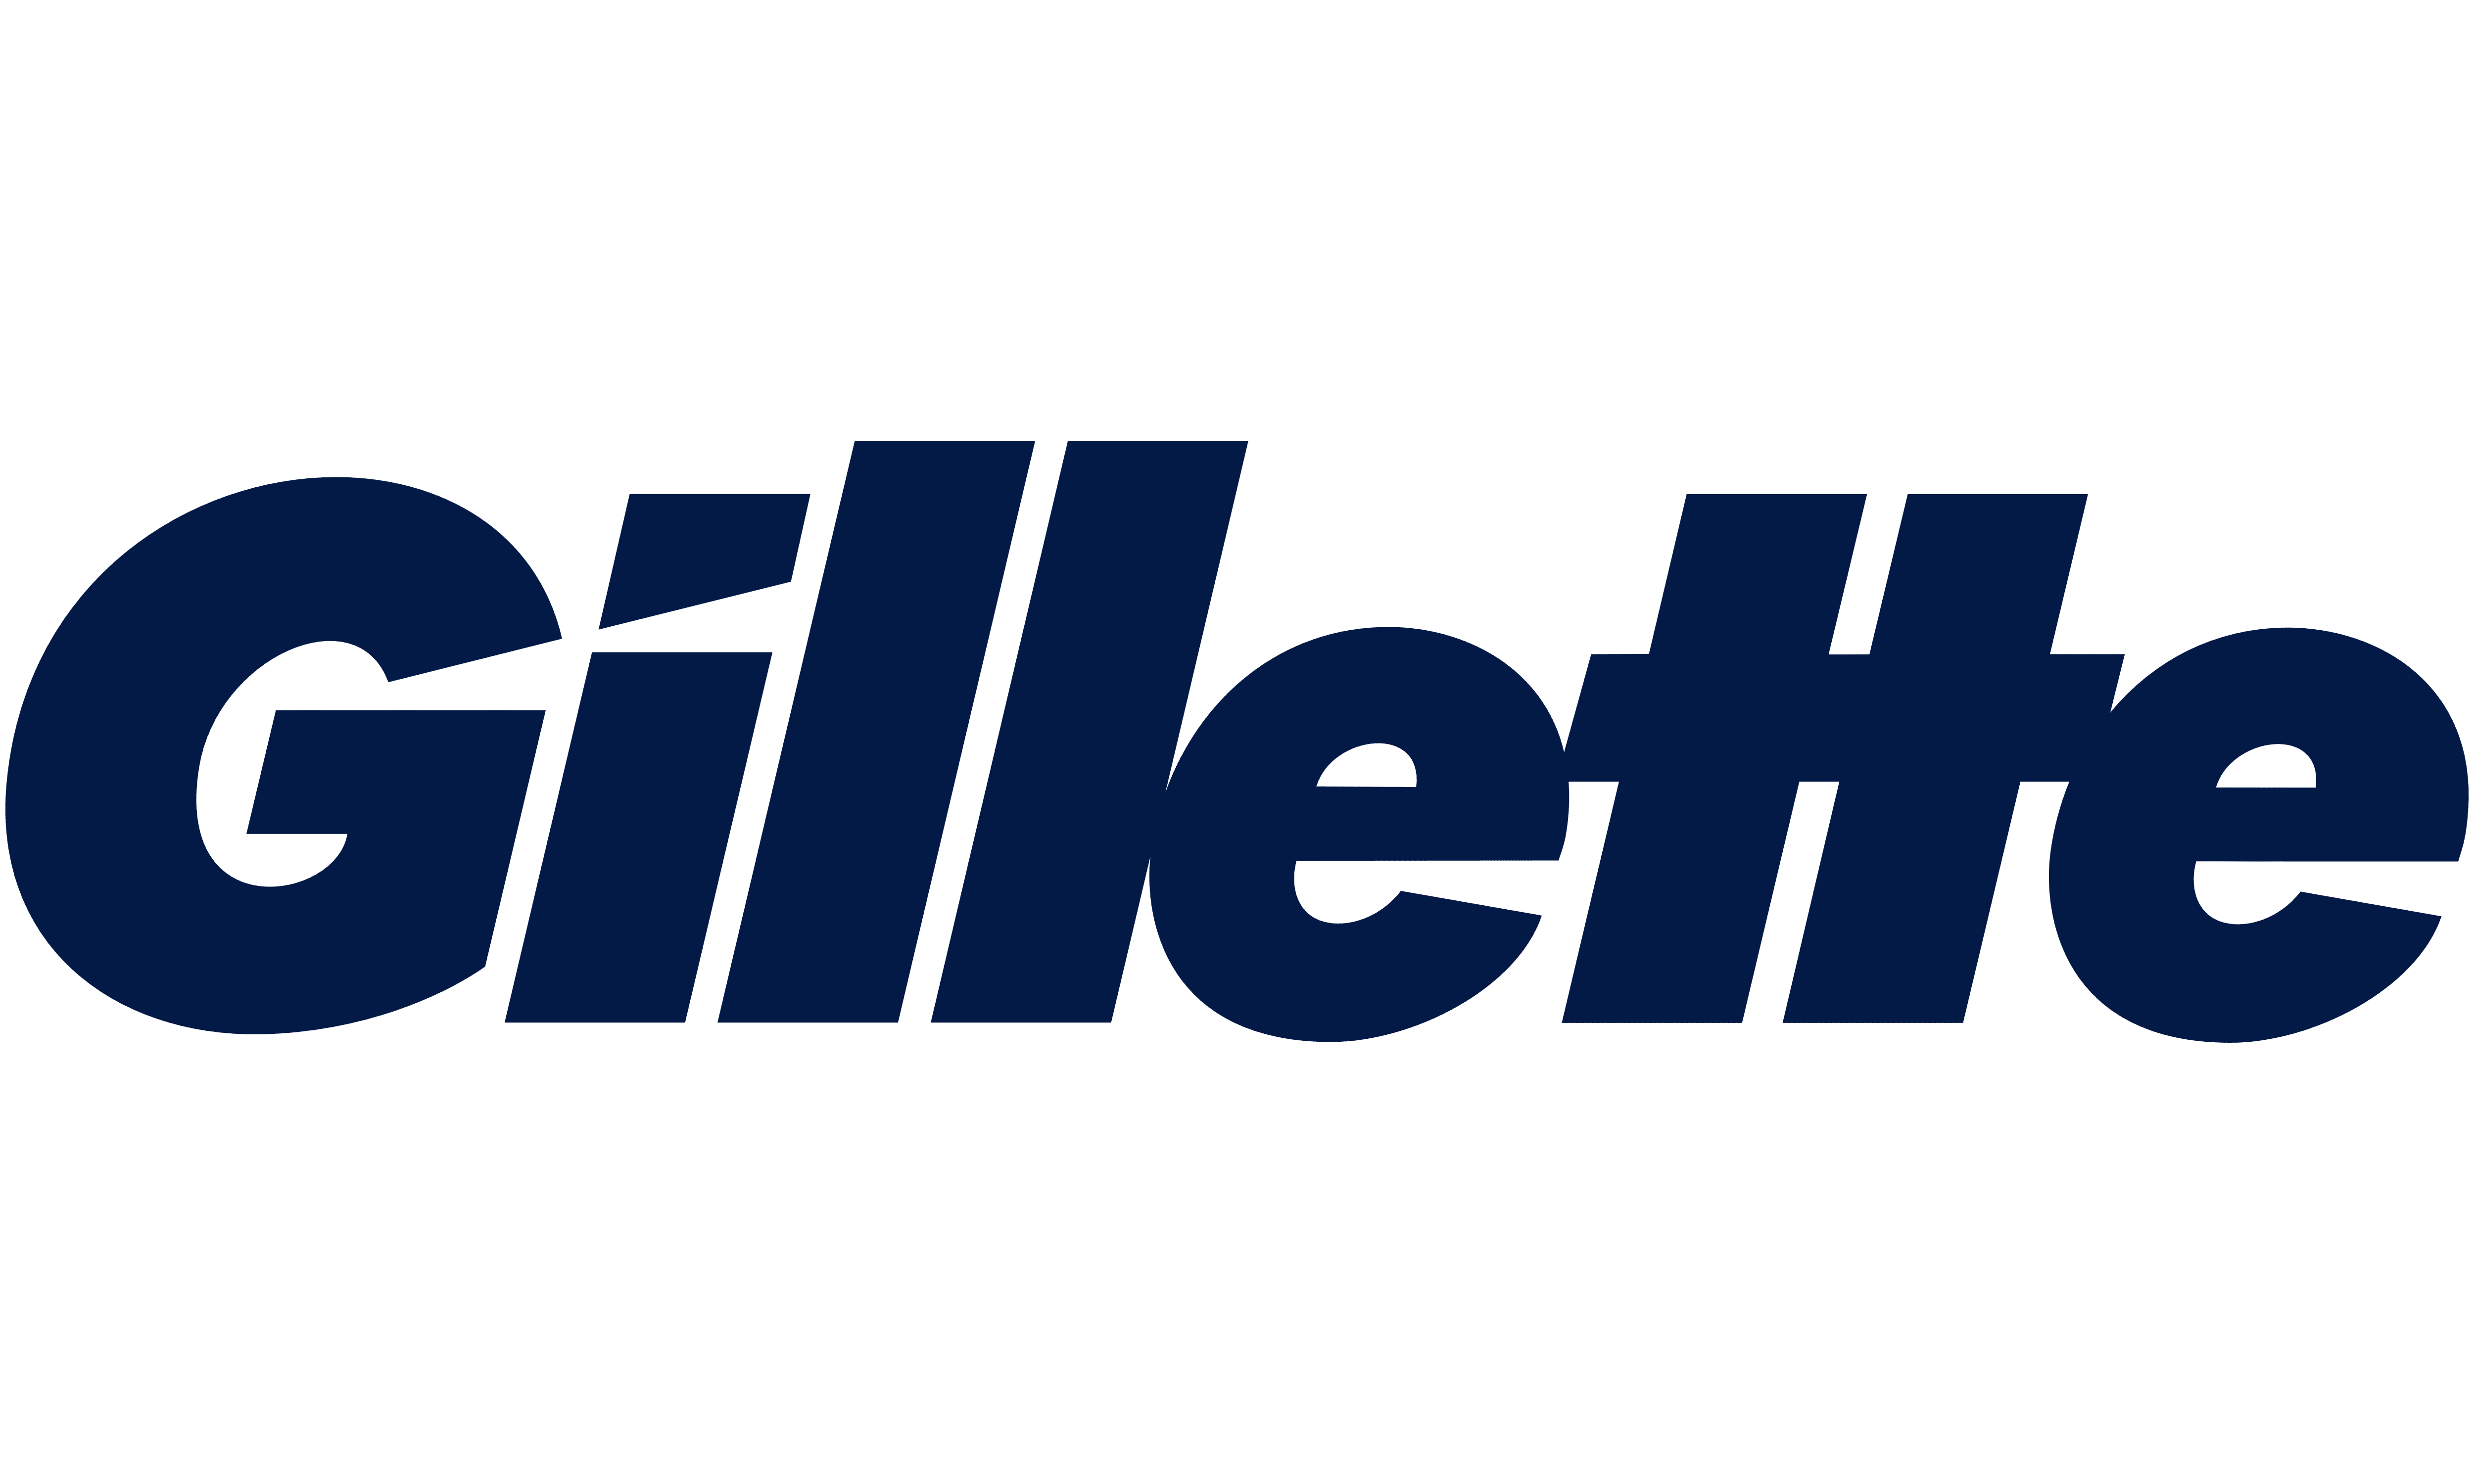 Gillette Coupons & Promo Codes